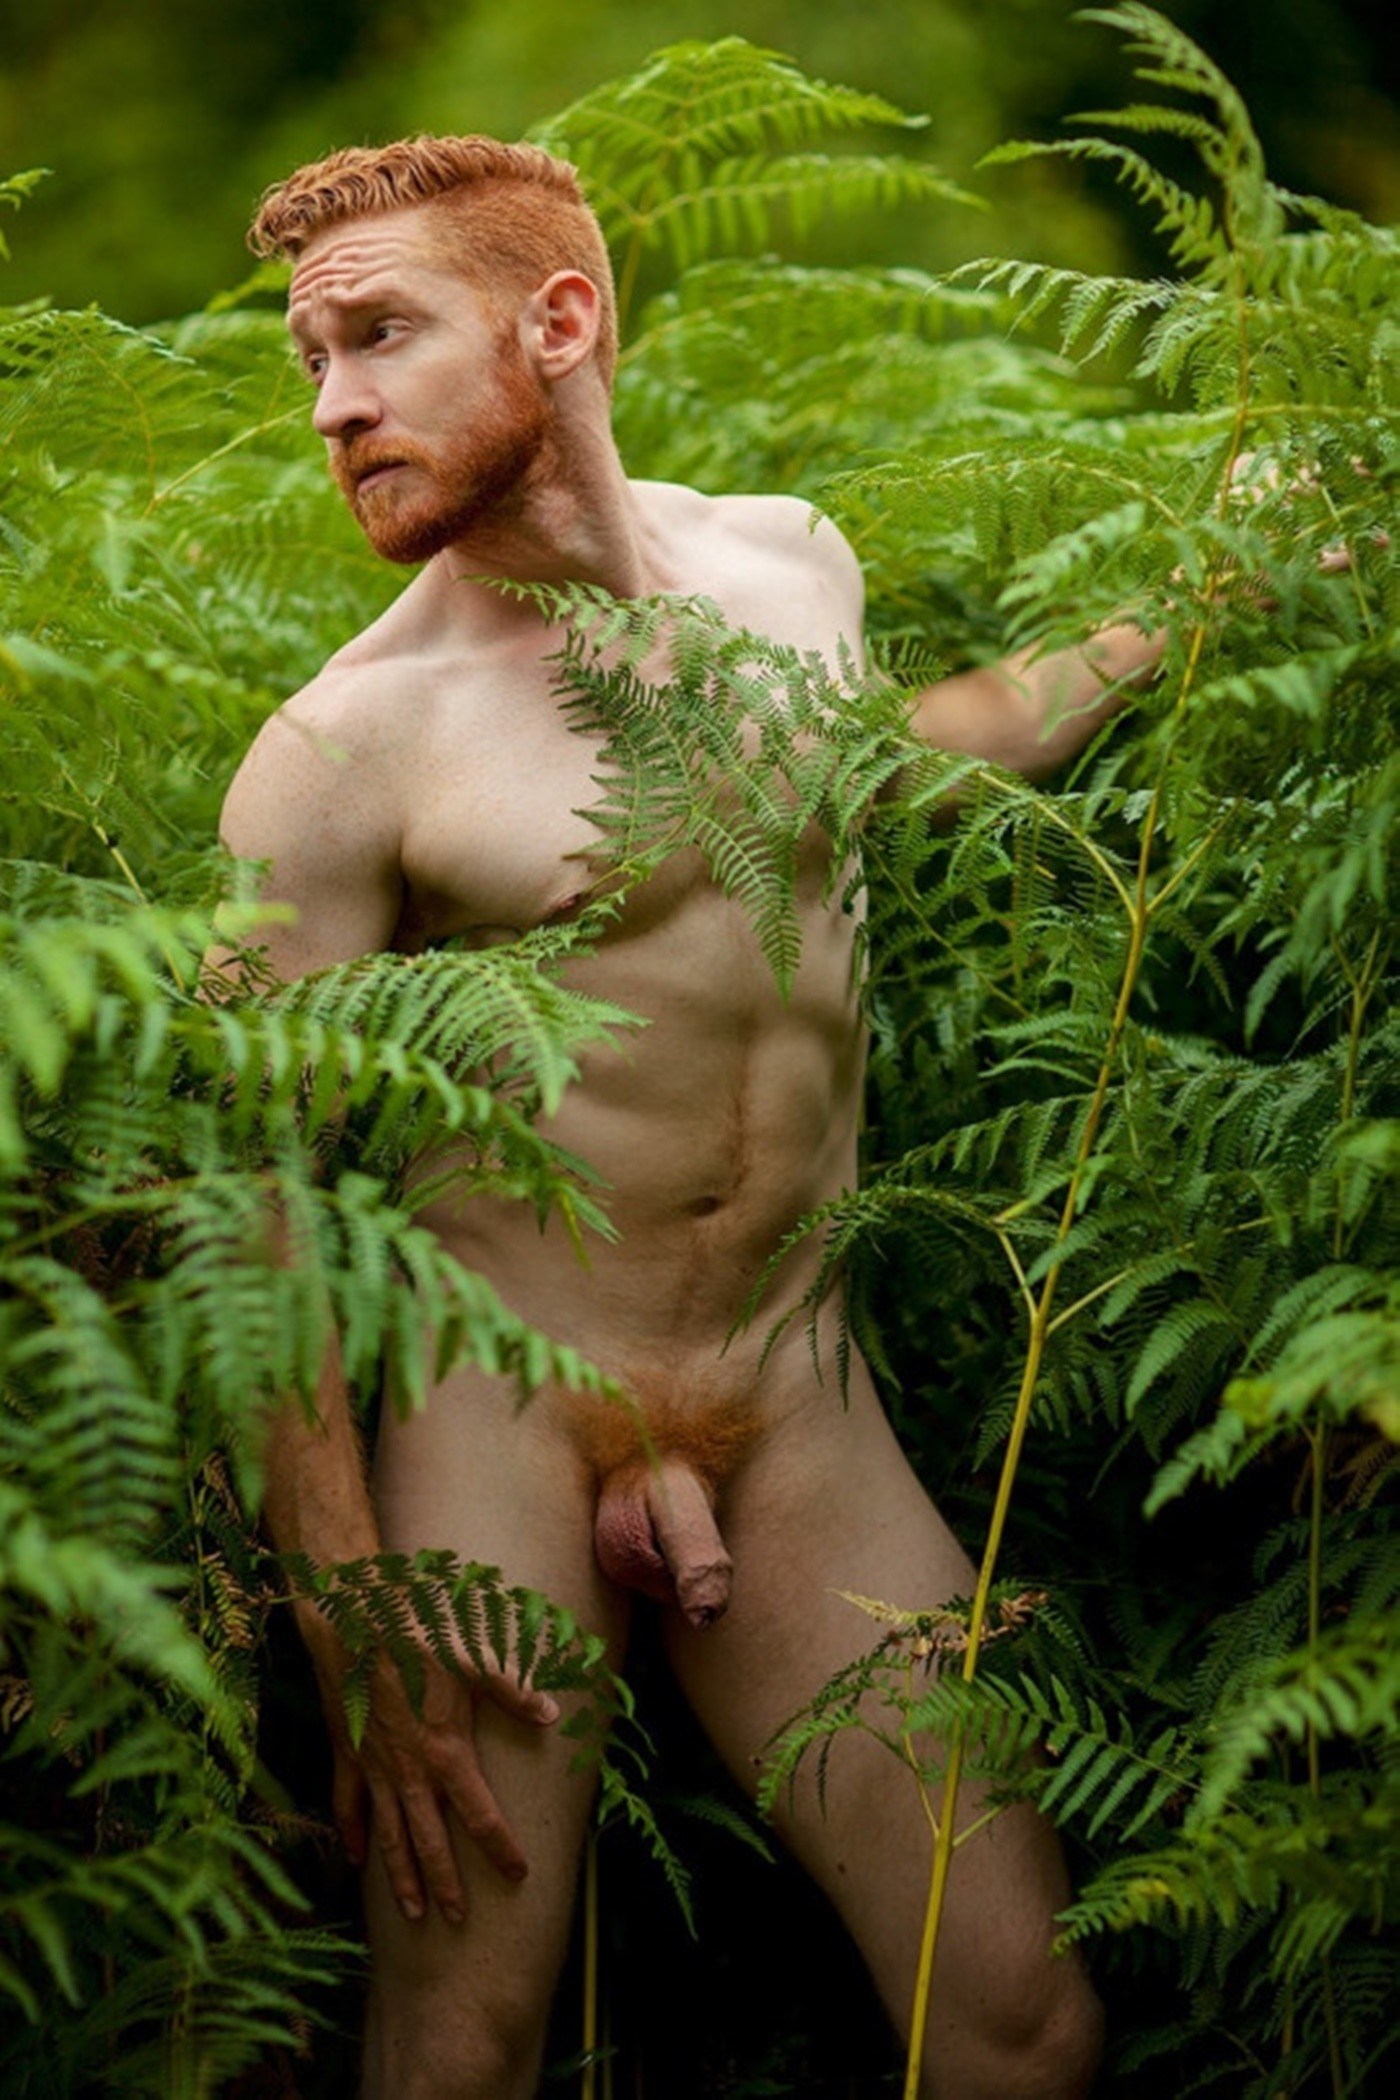 Discover the thrill of hairy men nude in our unbeatable gallery